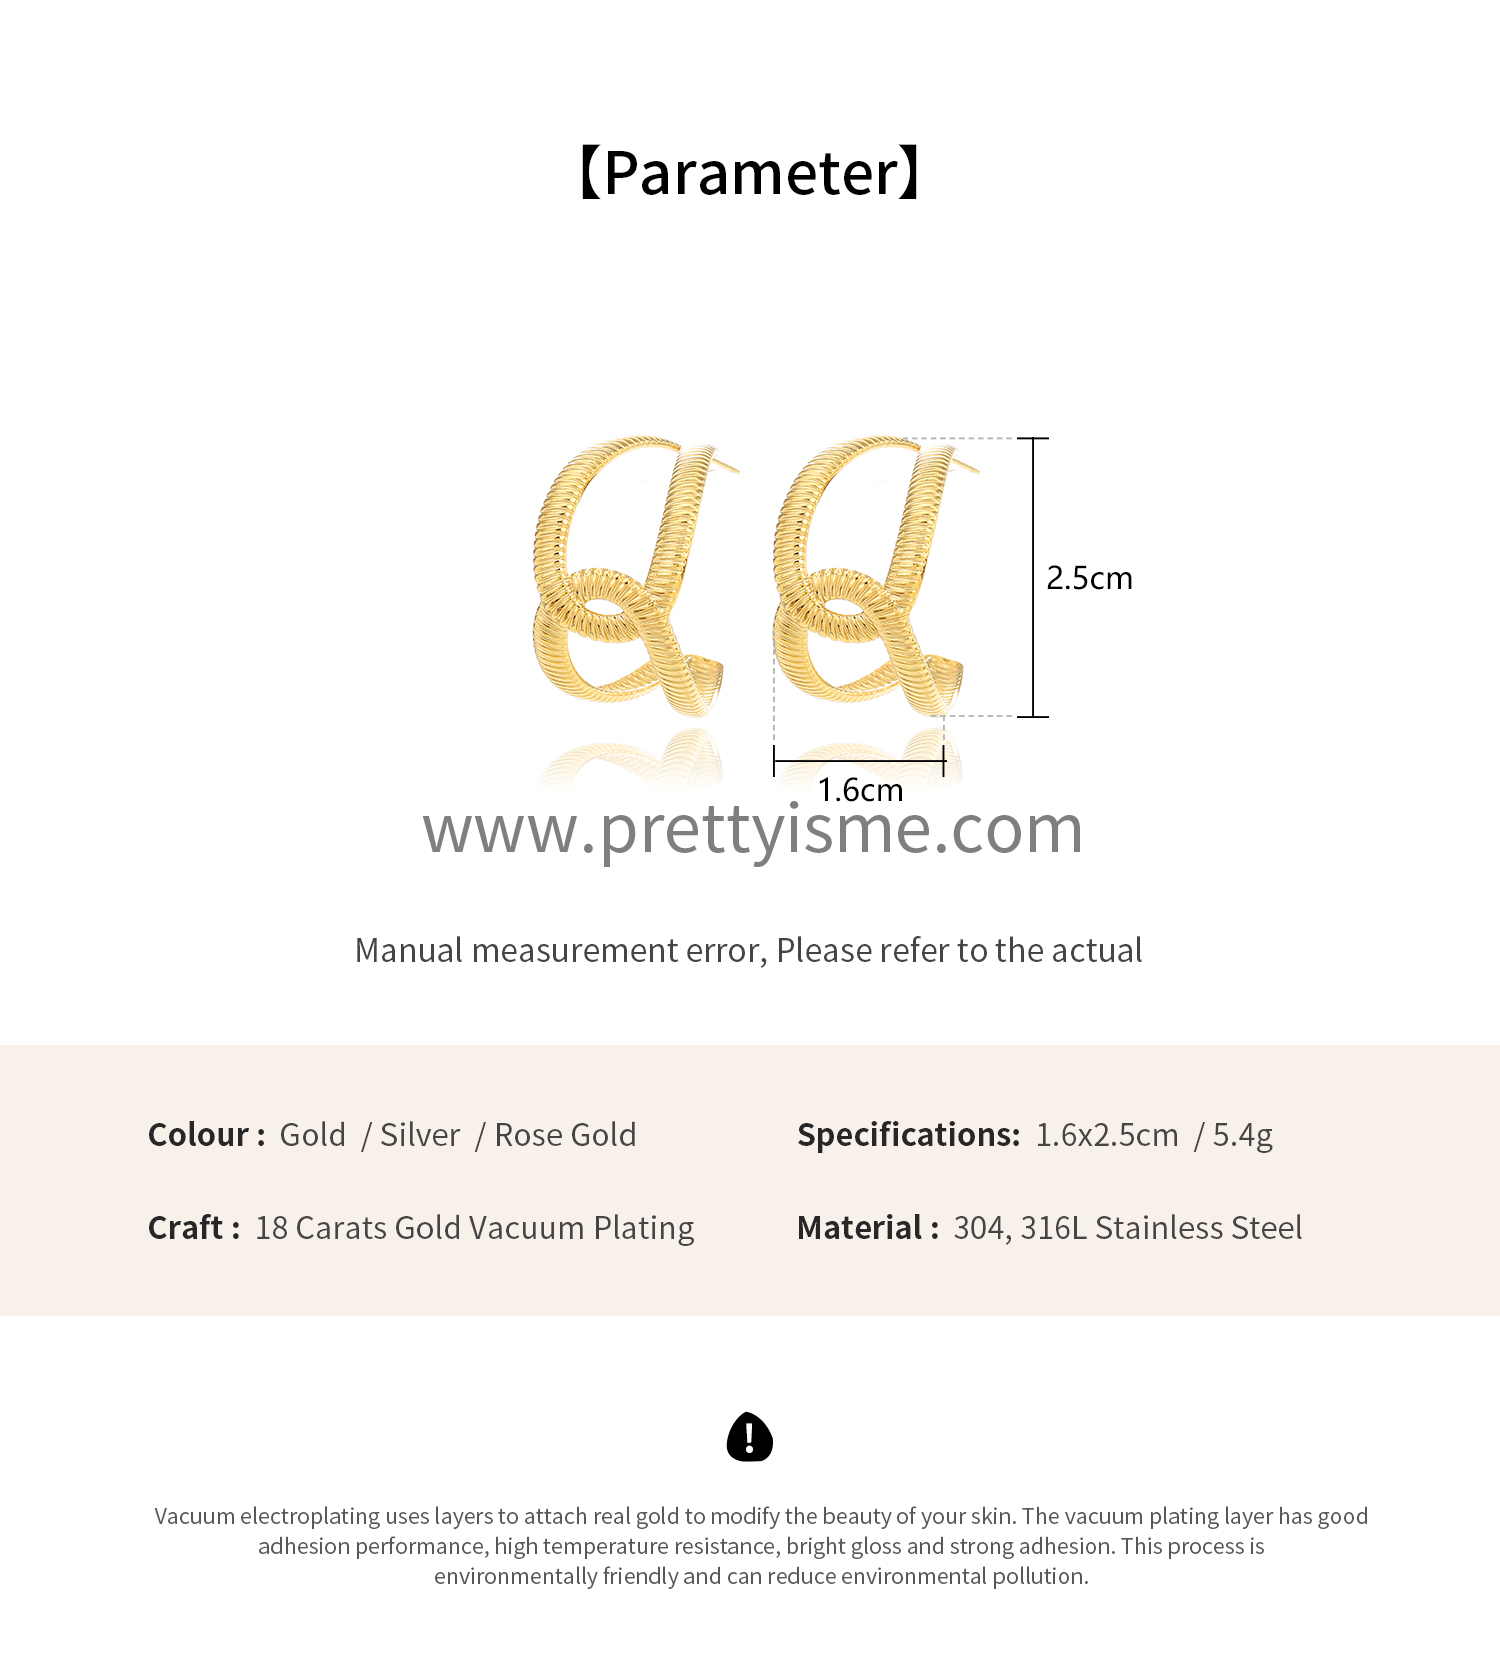 Pretty Is Me Collection INS Simple Style Hollow Out 18K Gold Vacuum Plated 316L Stainless Steel Infinite Stud Earrings Women (1).webp